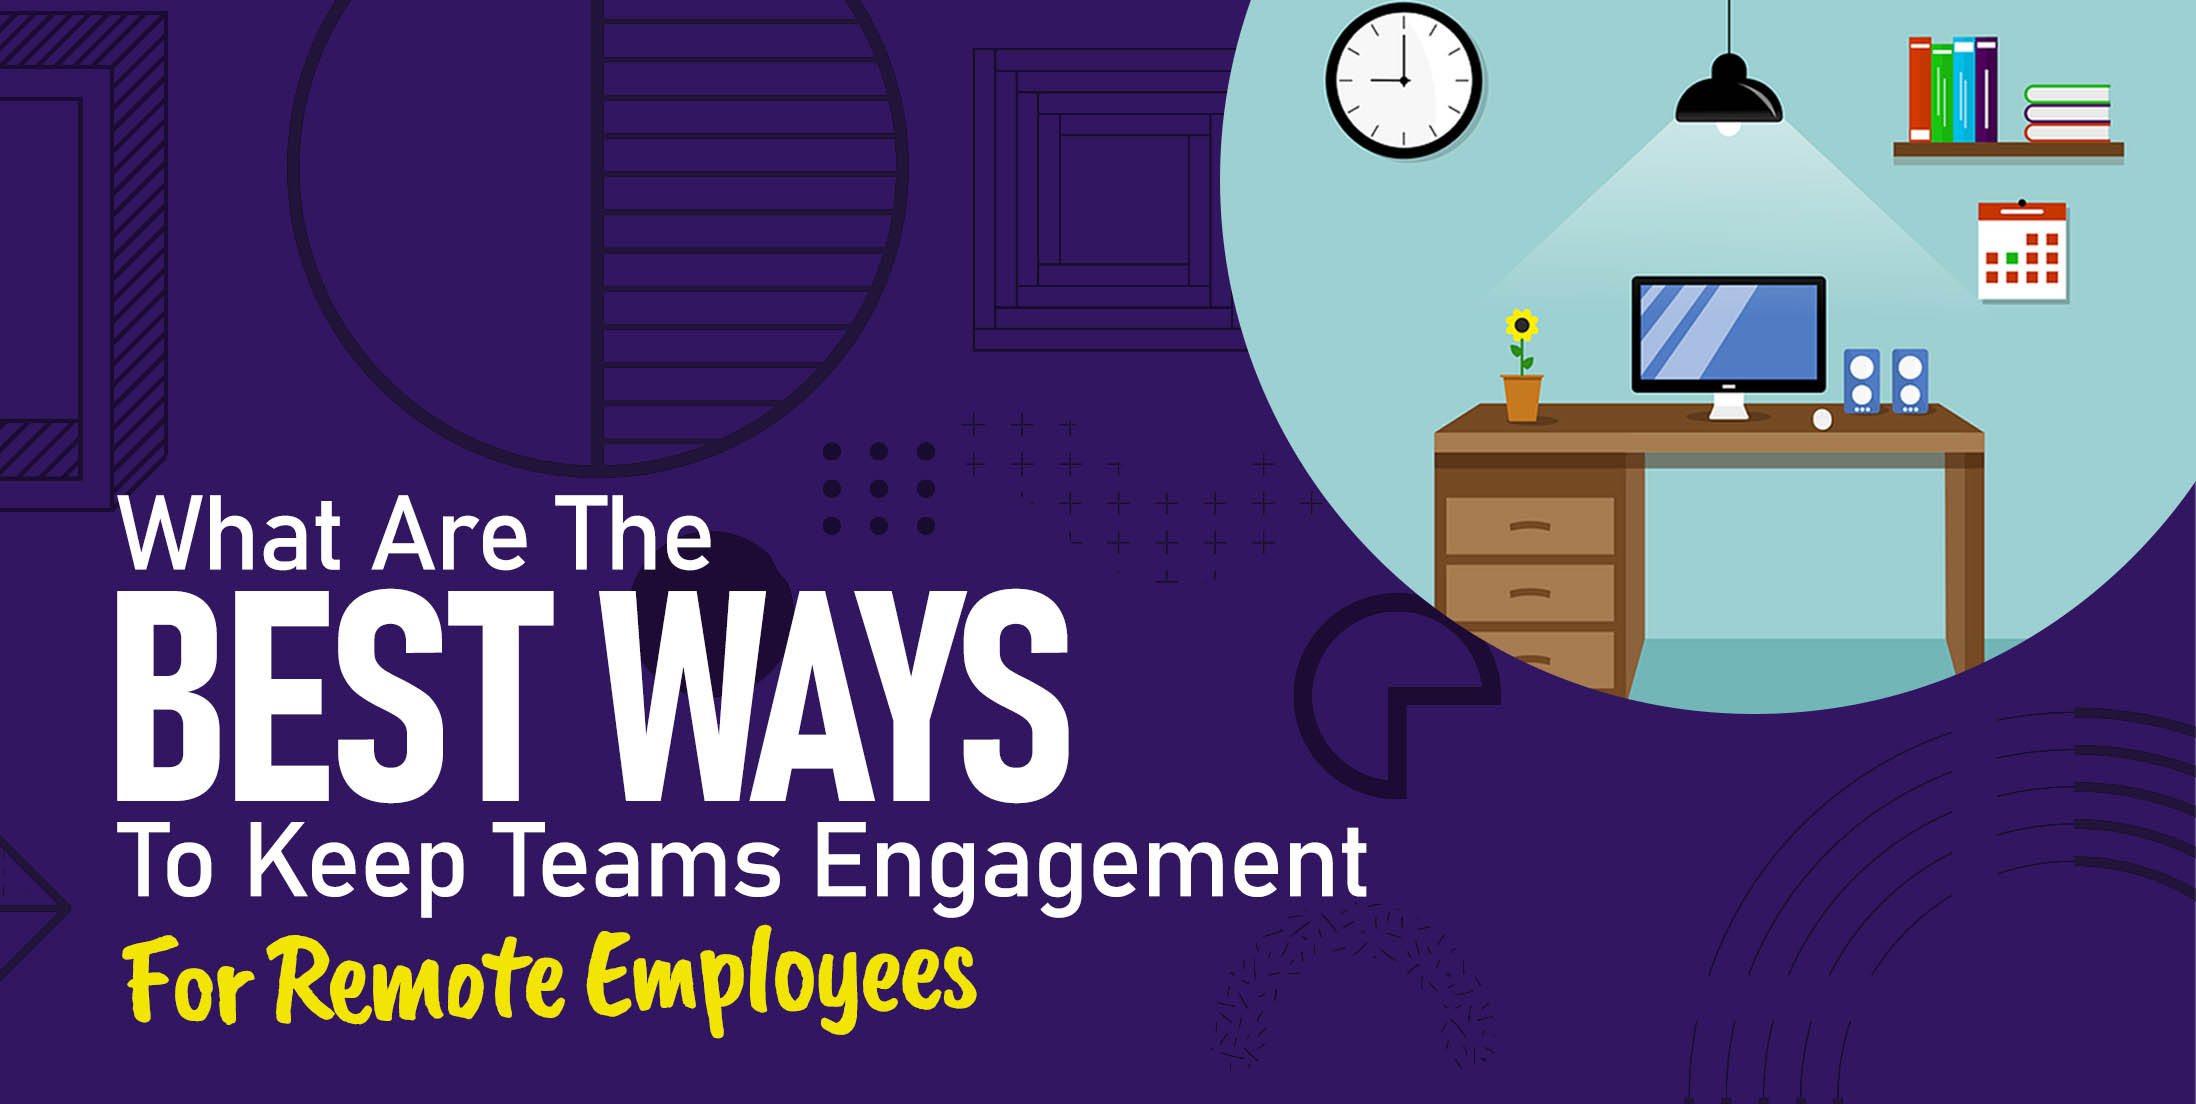 What Are the Best Ways to Keep Teams Engagement for Remote Employees